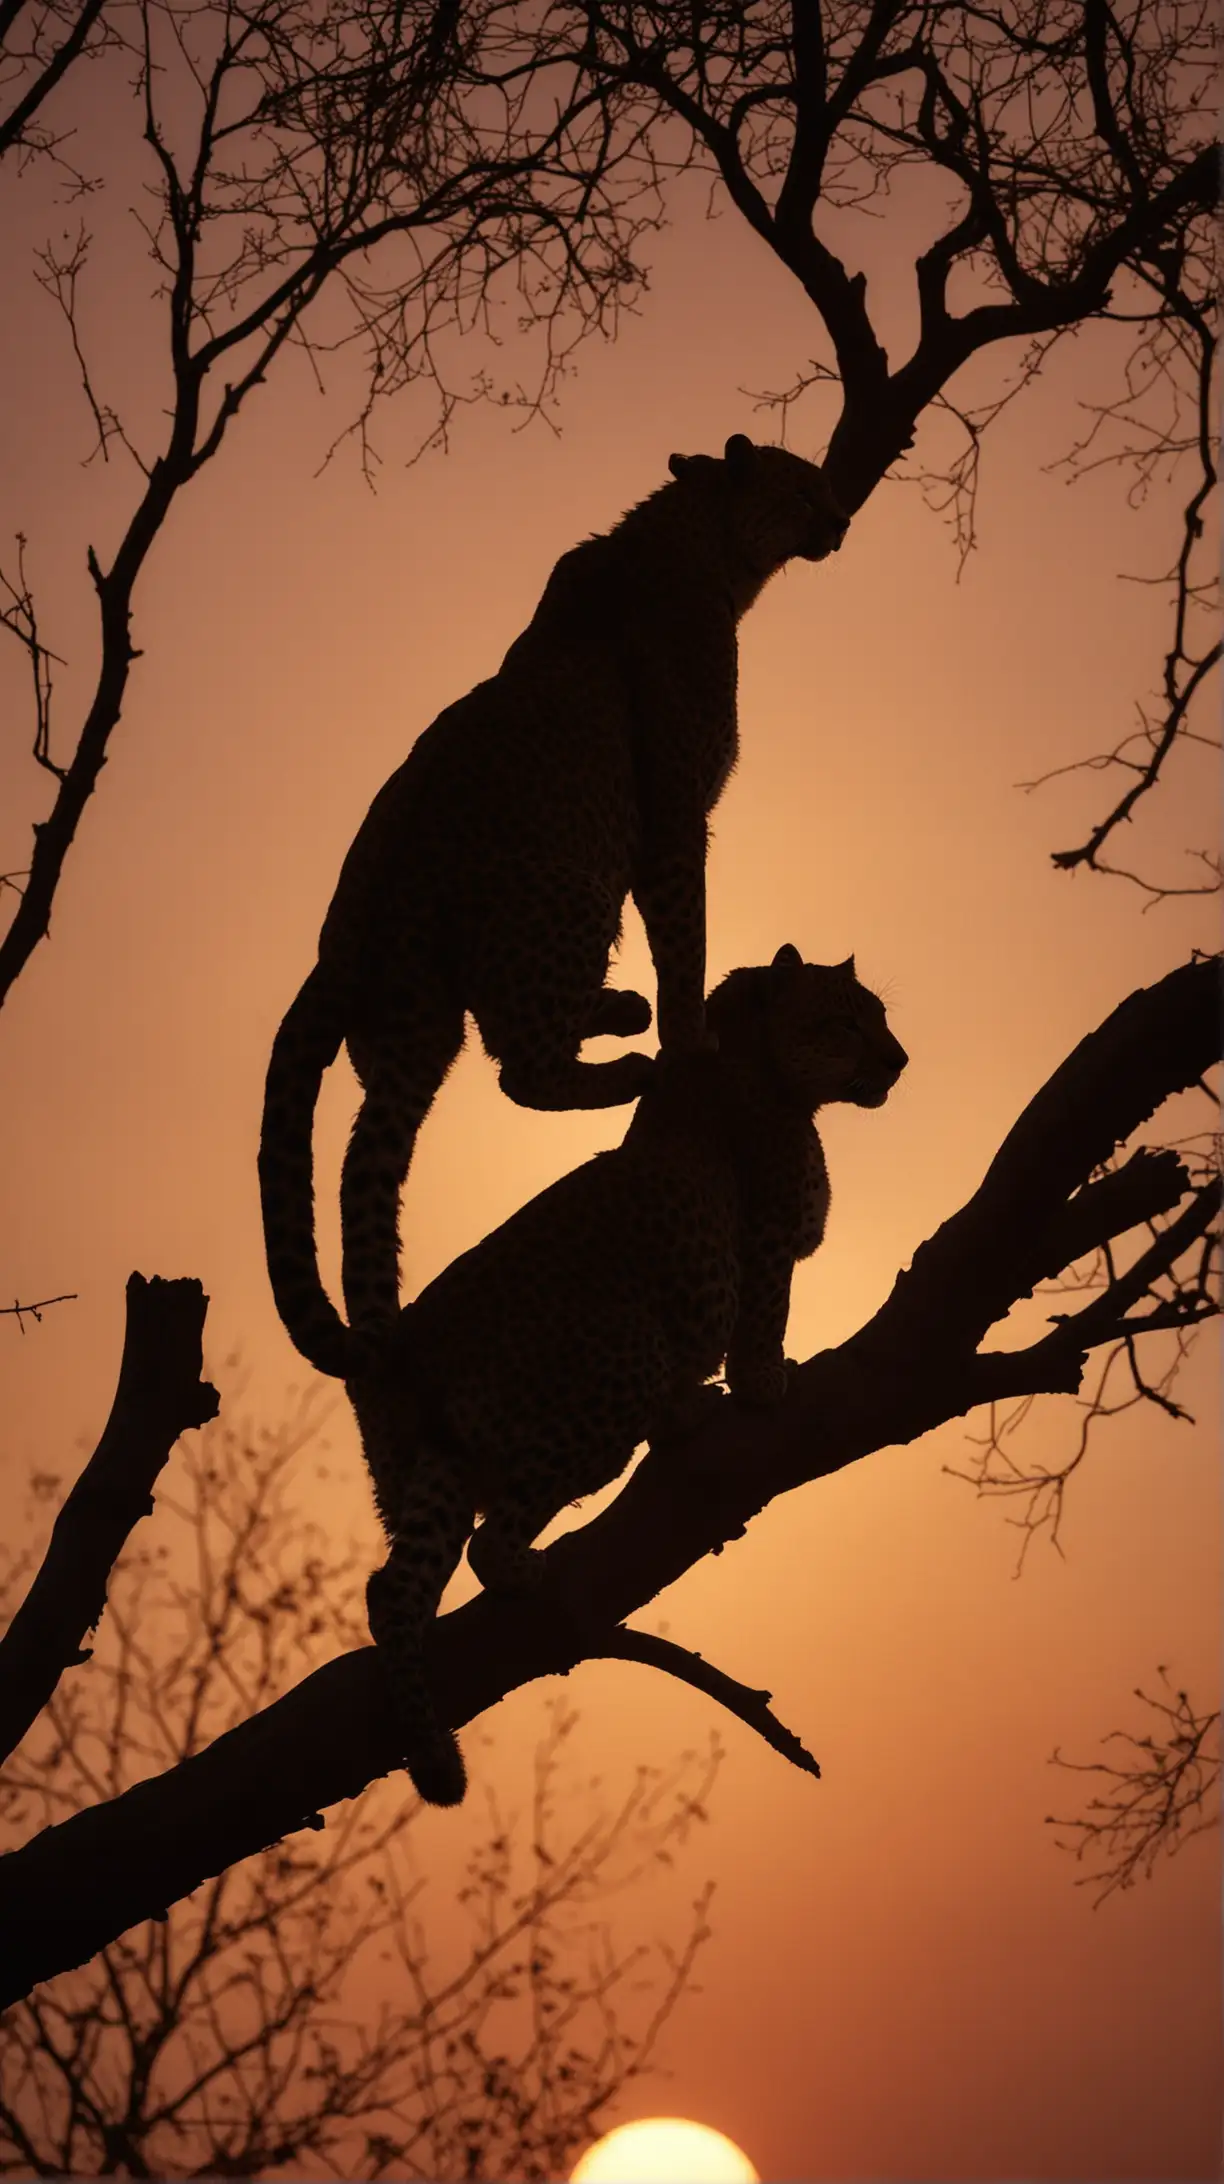 a silhouette of a leopard on a tree branch against a sunset background.” The style of art is a photograph with a focus on silhouette and natural lighting.